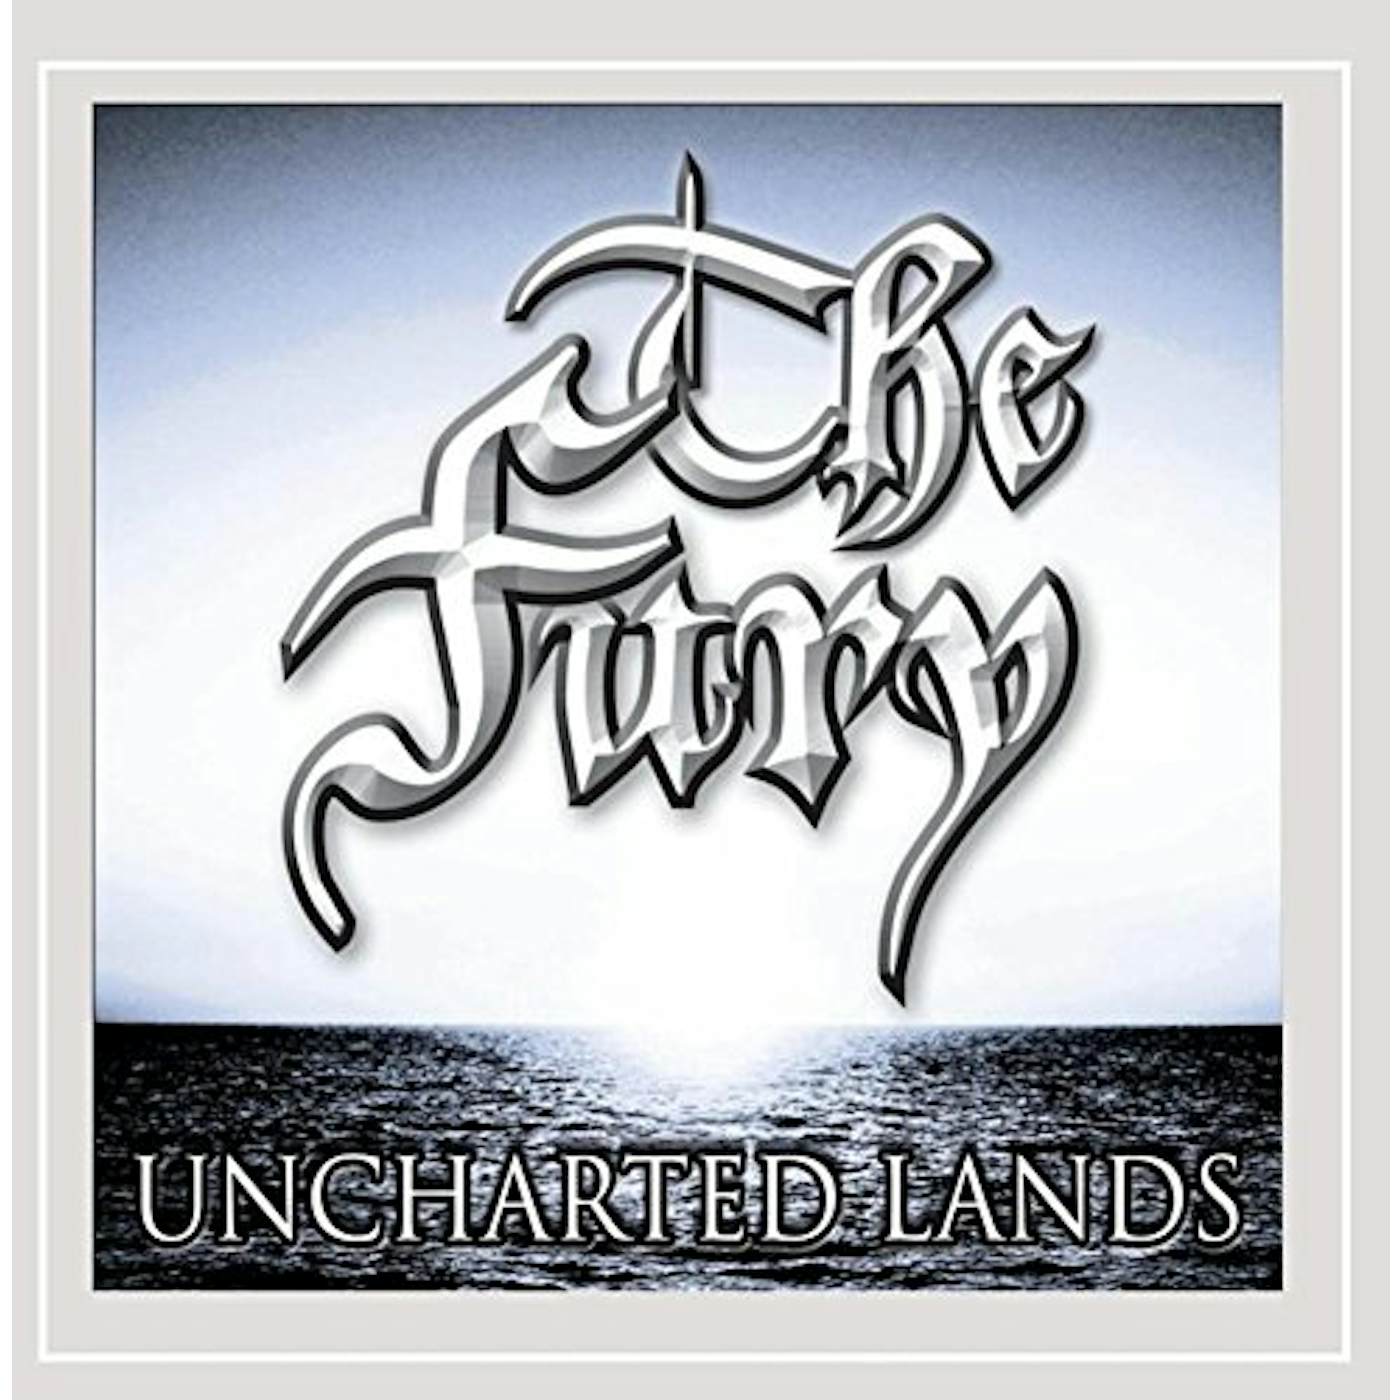 Fury UNCHARTED LANDS CD